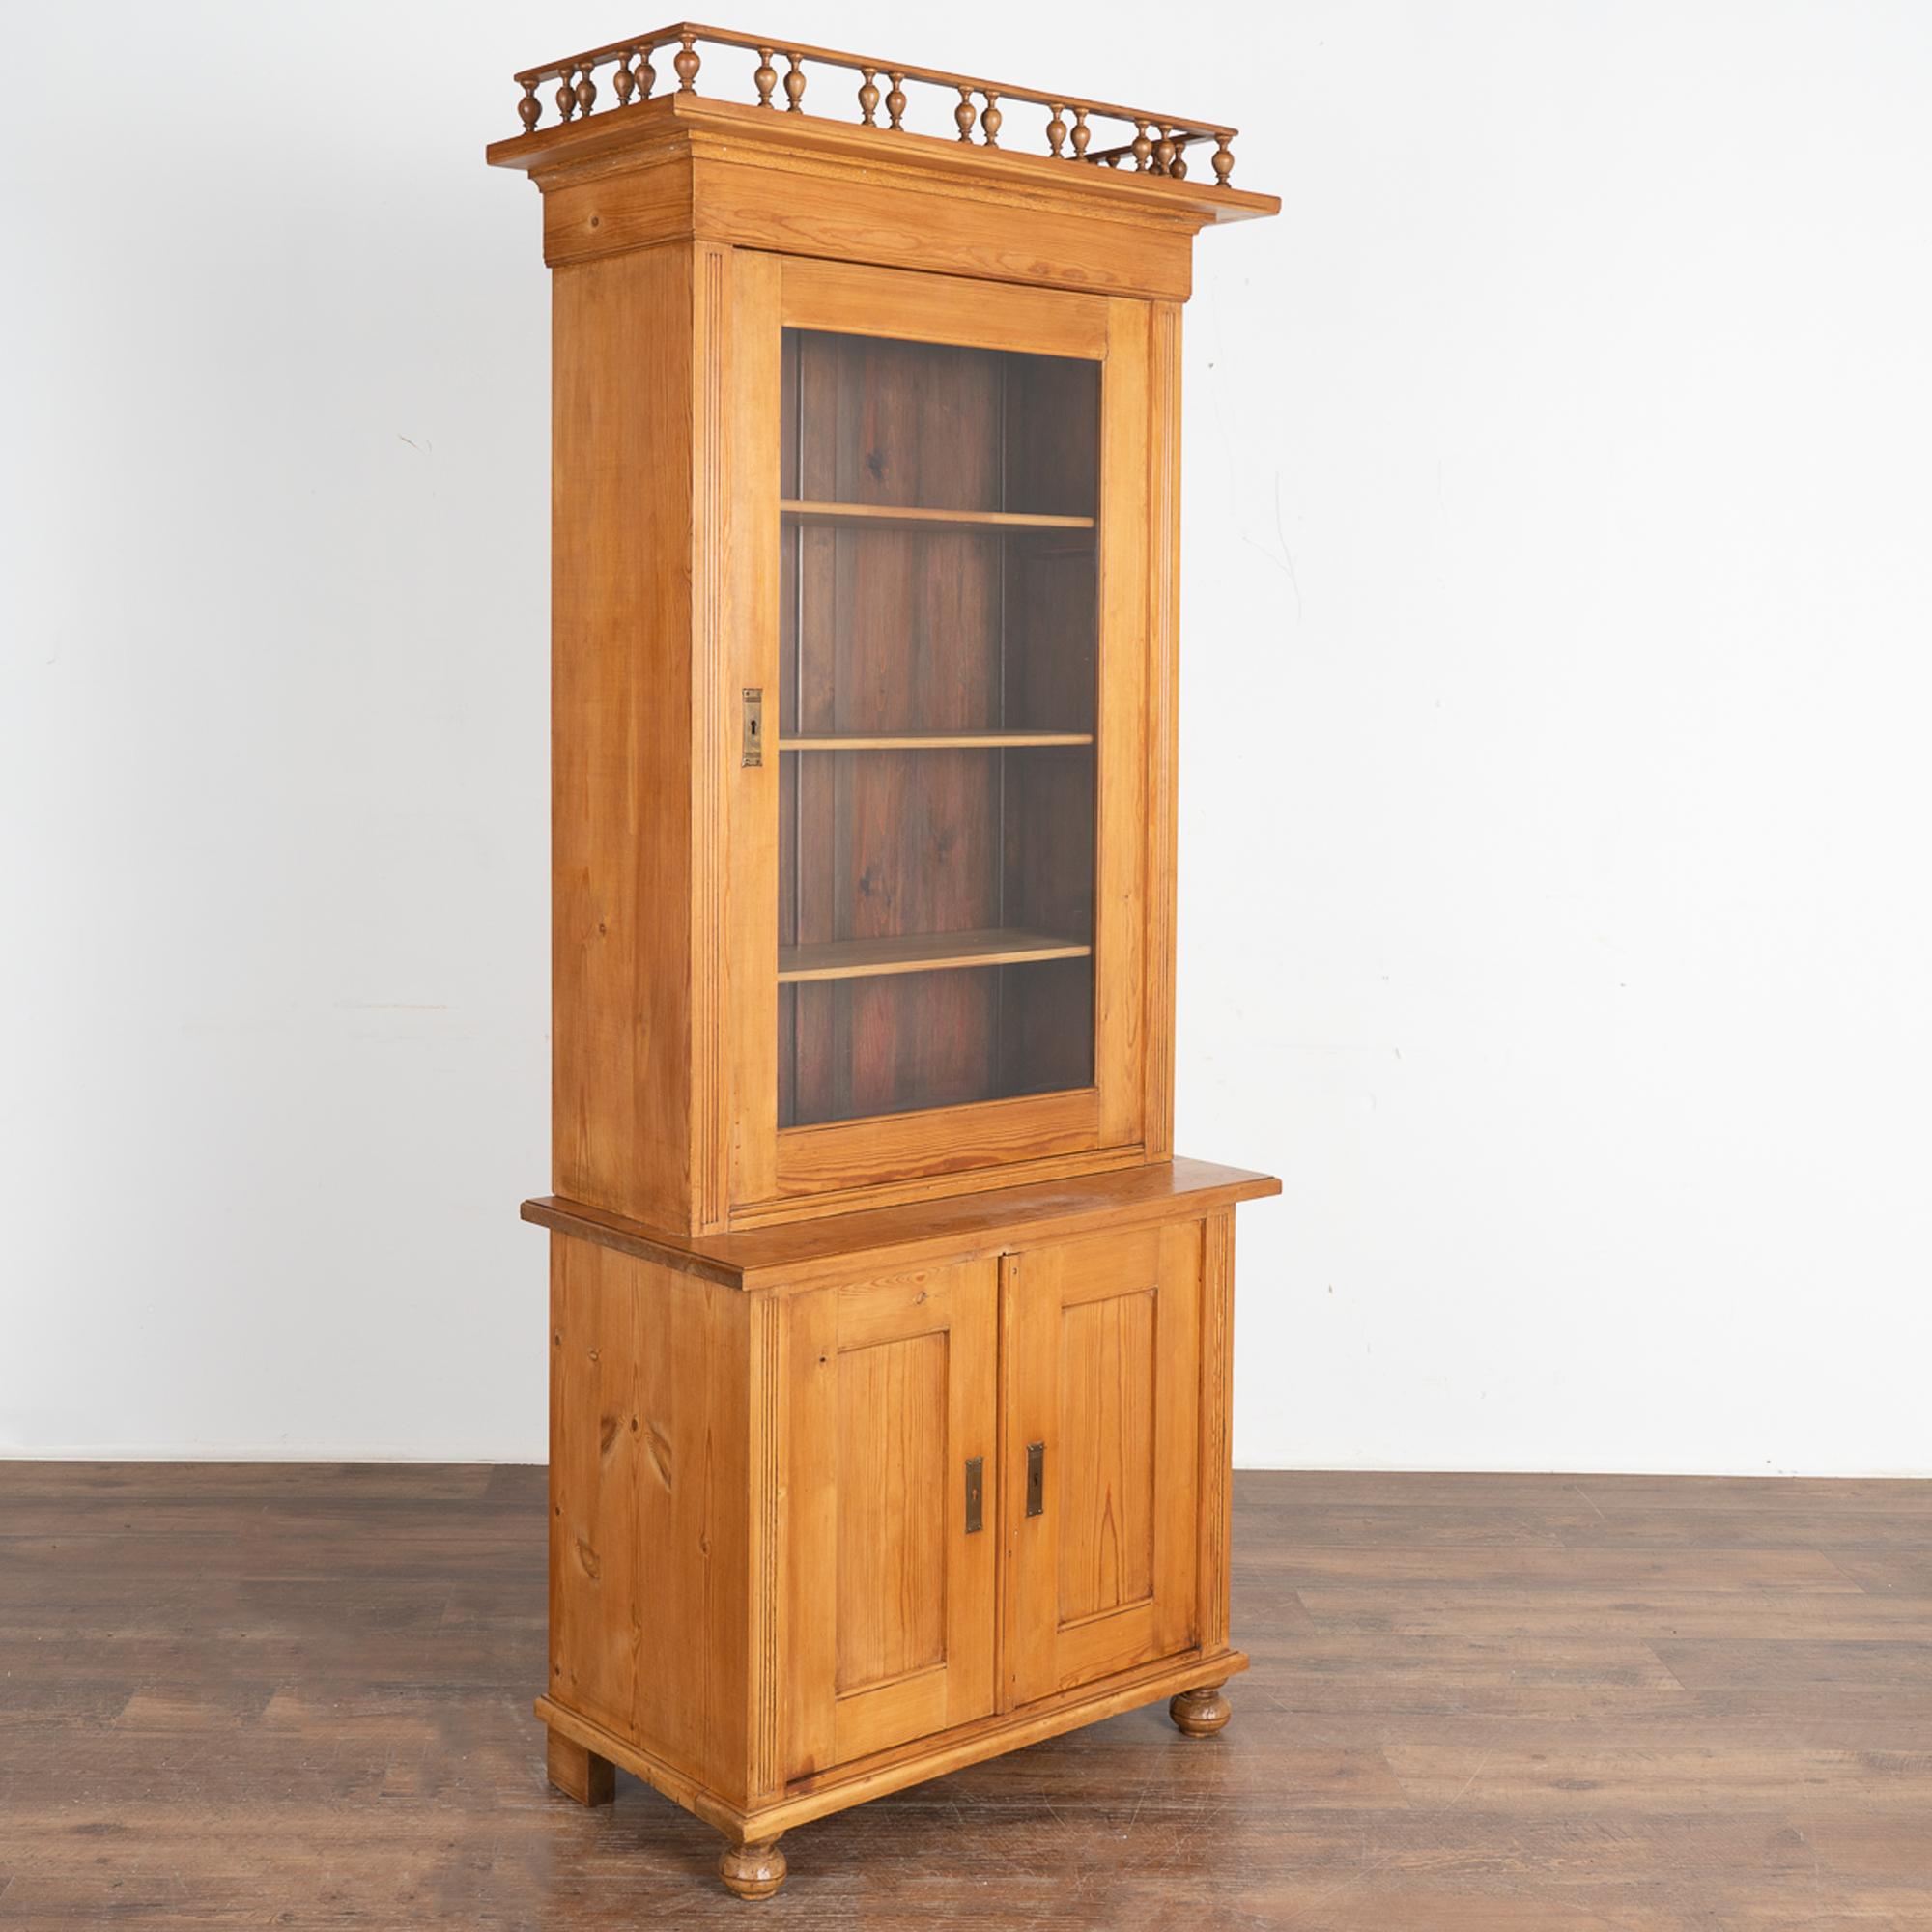 Narrow pine display cabinet or bookcase with fluted side trim, bun feet and finials forming crown. 
Interior shelving creates easy display of books or collectibles, while the 33